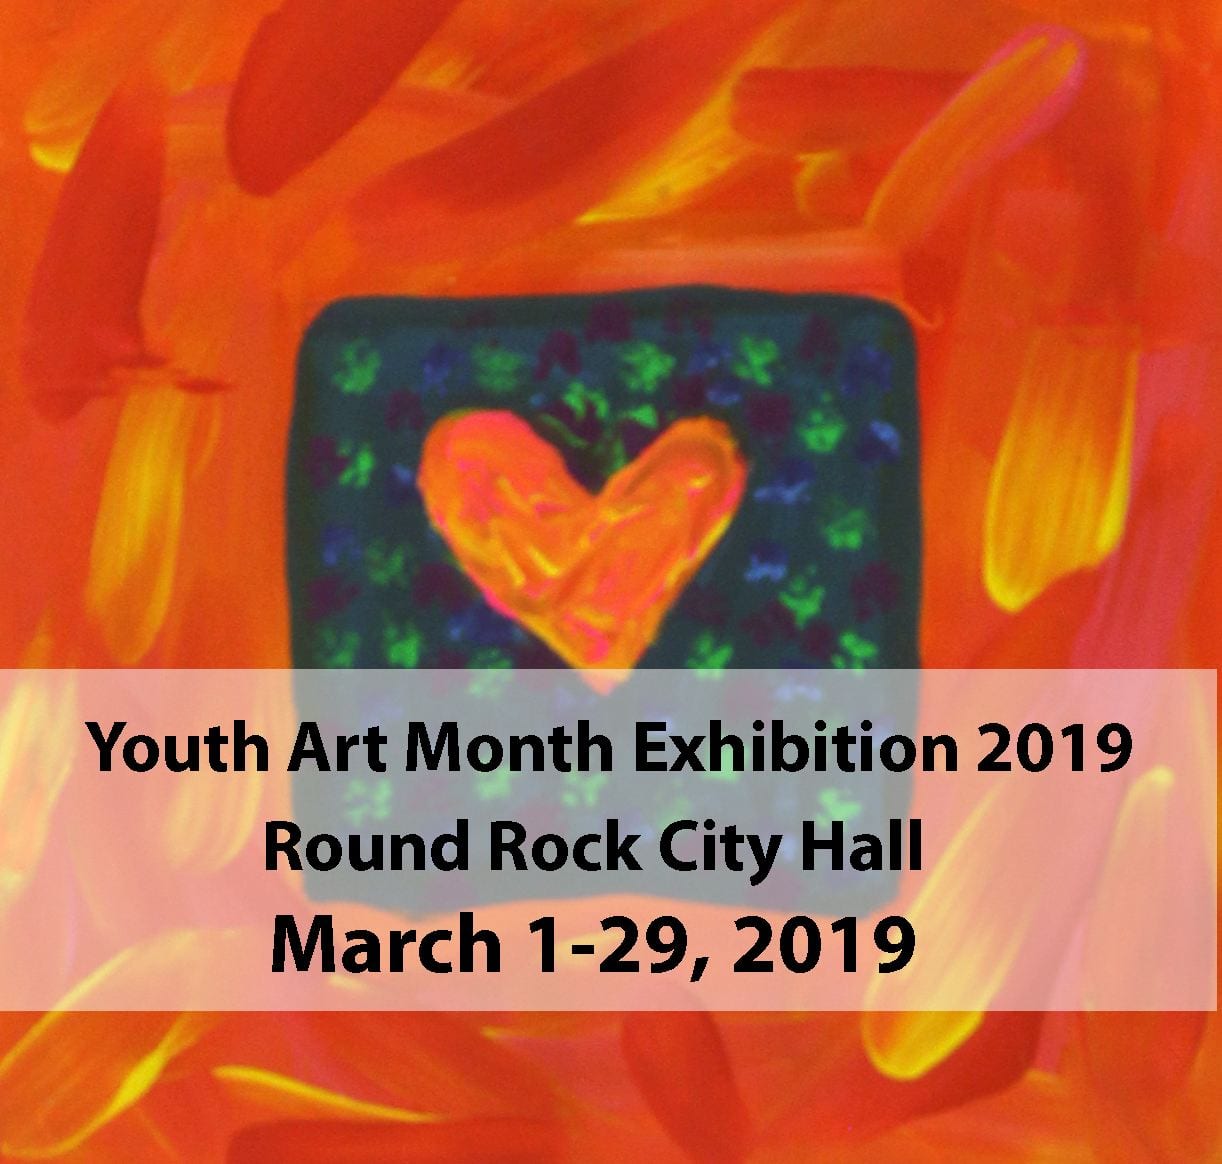 Youth Art Month Exhibition showcased at Round Rock City Hall